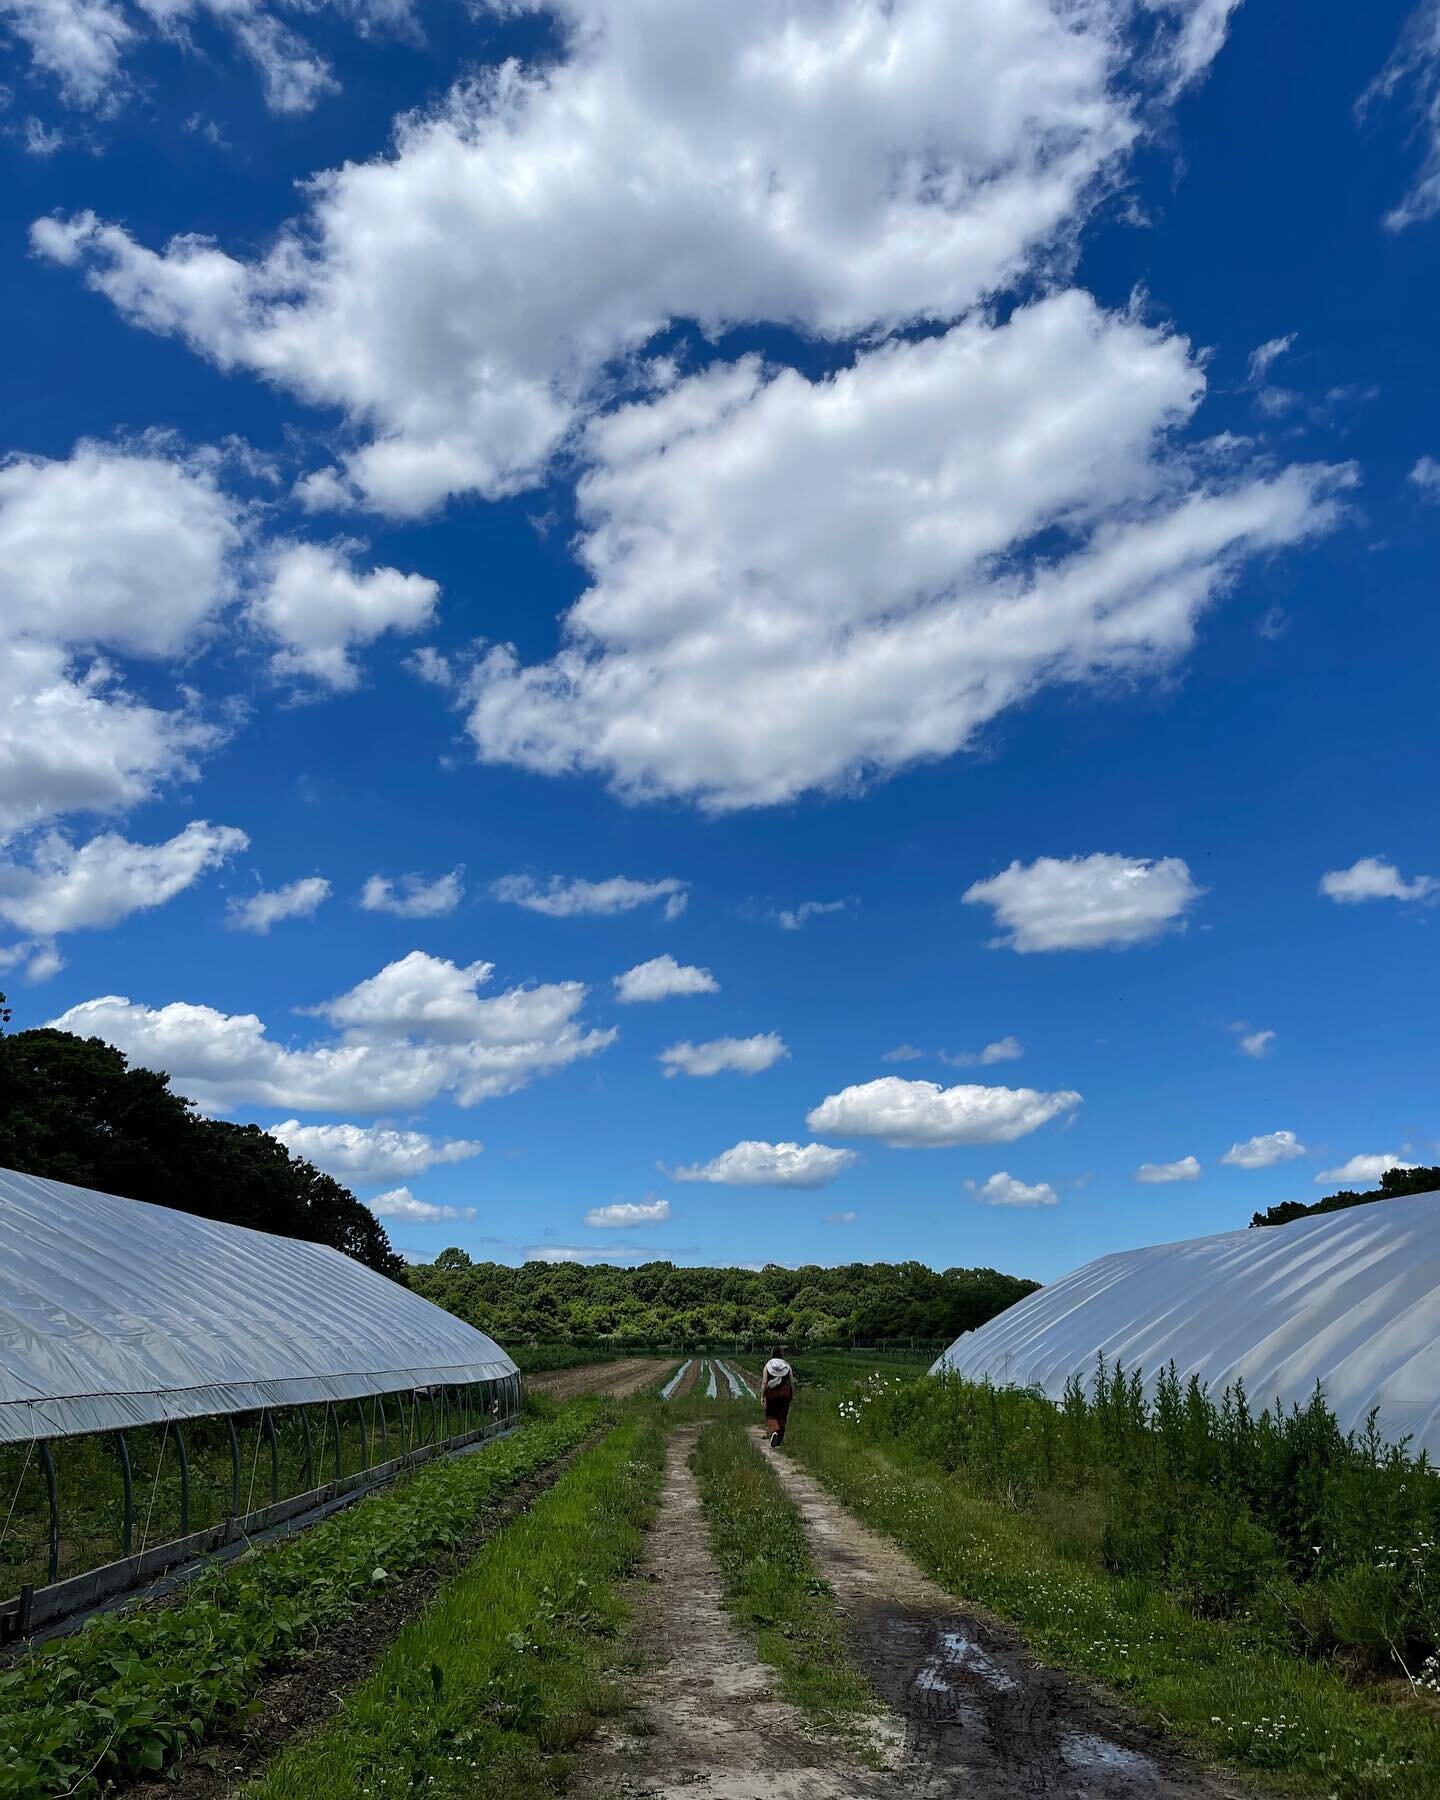 Even for our largest events, we source ingredients from small, local farms that use sustainable practices, like The Hog Farm in Brookhaven, NY.

#marlowevents #knowyourfarmers